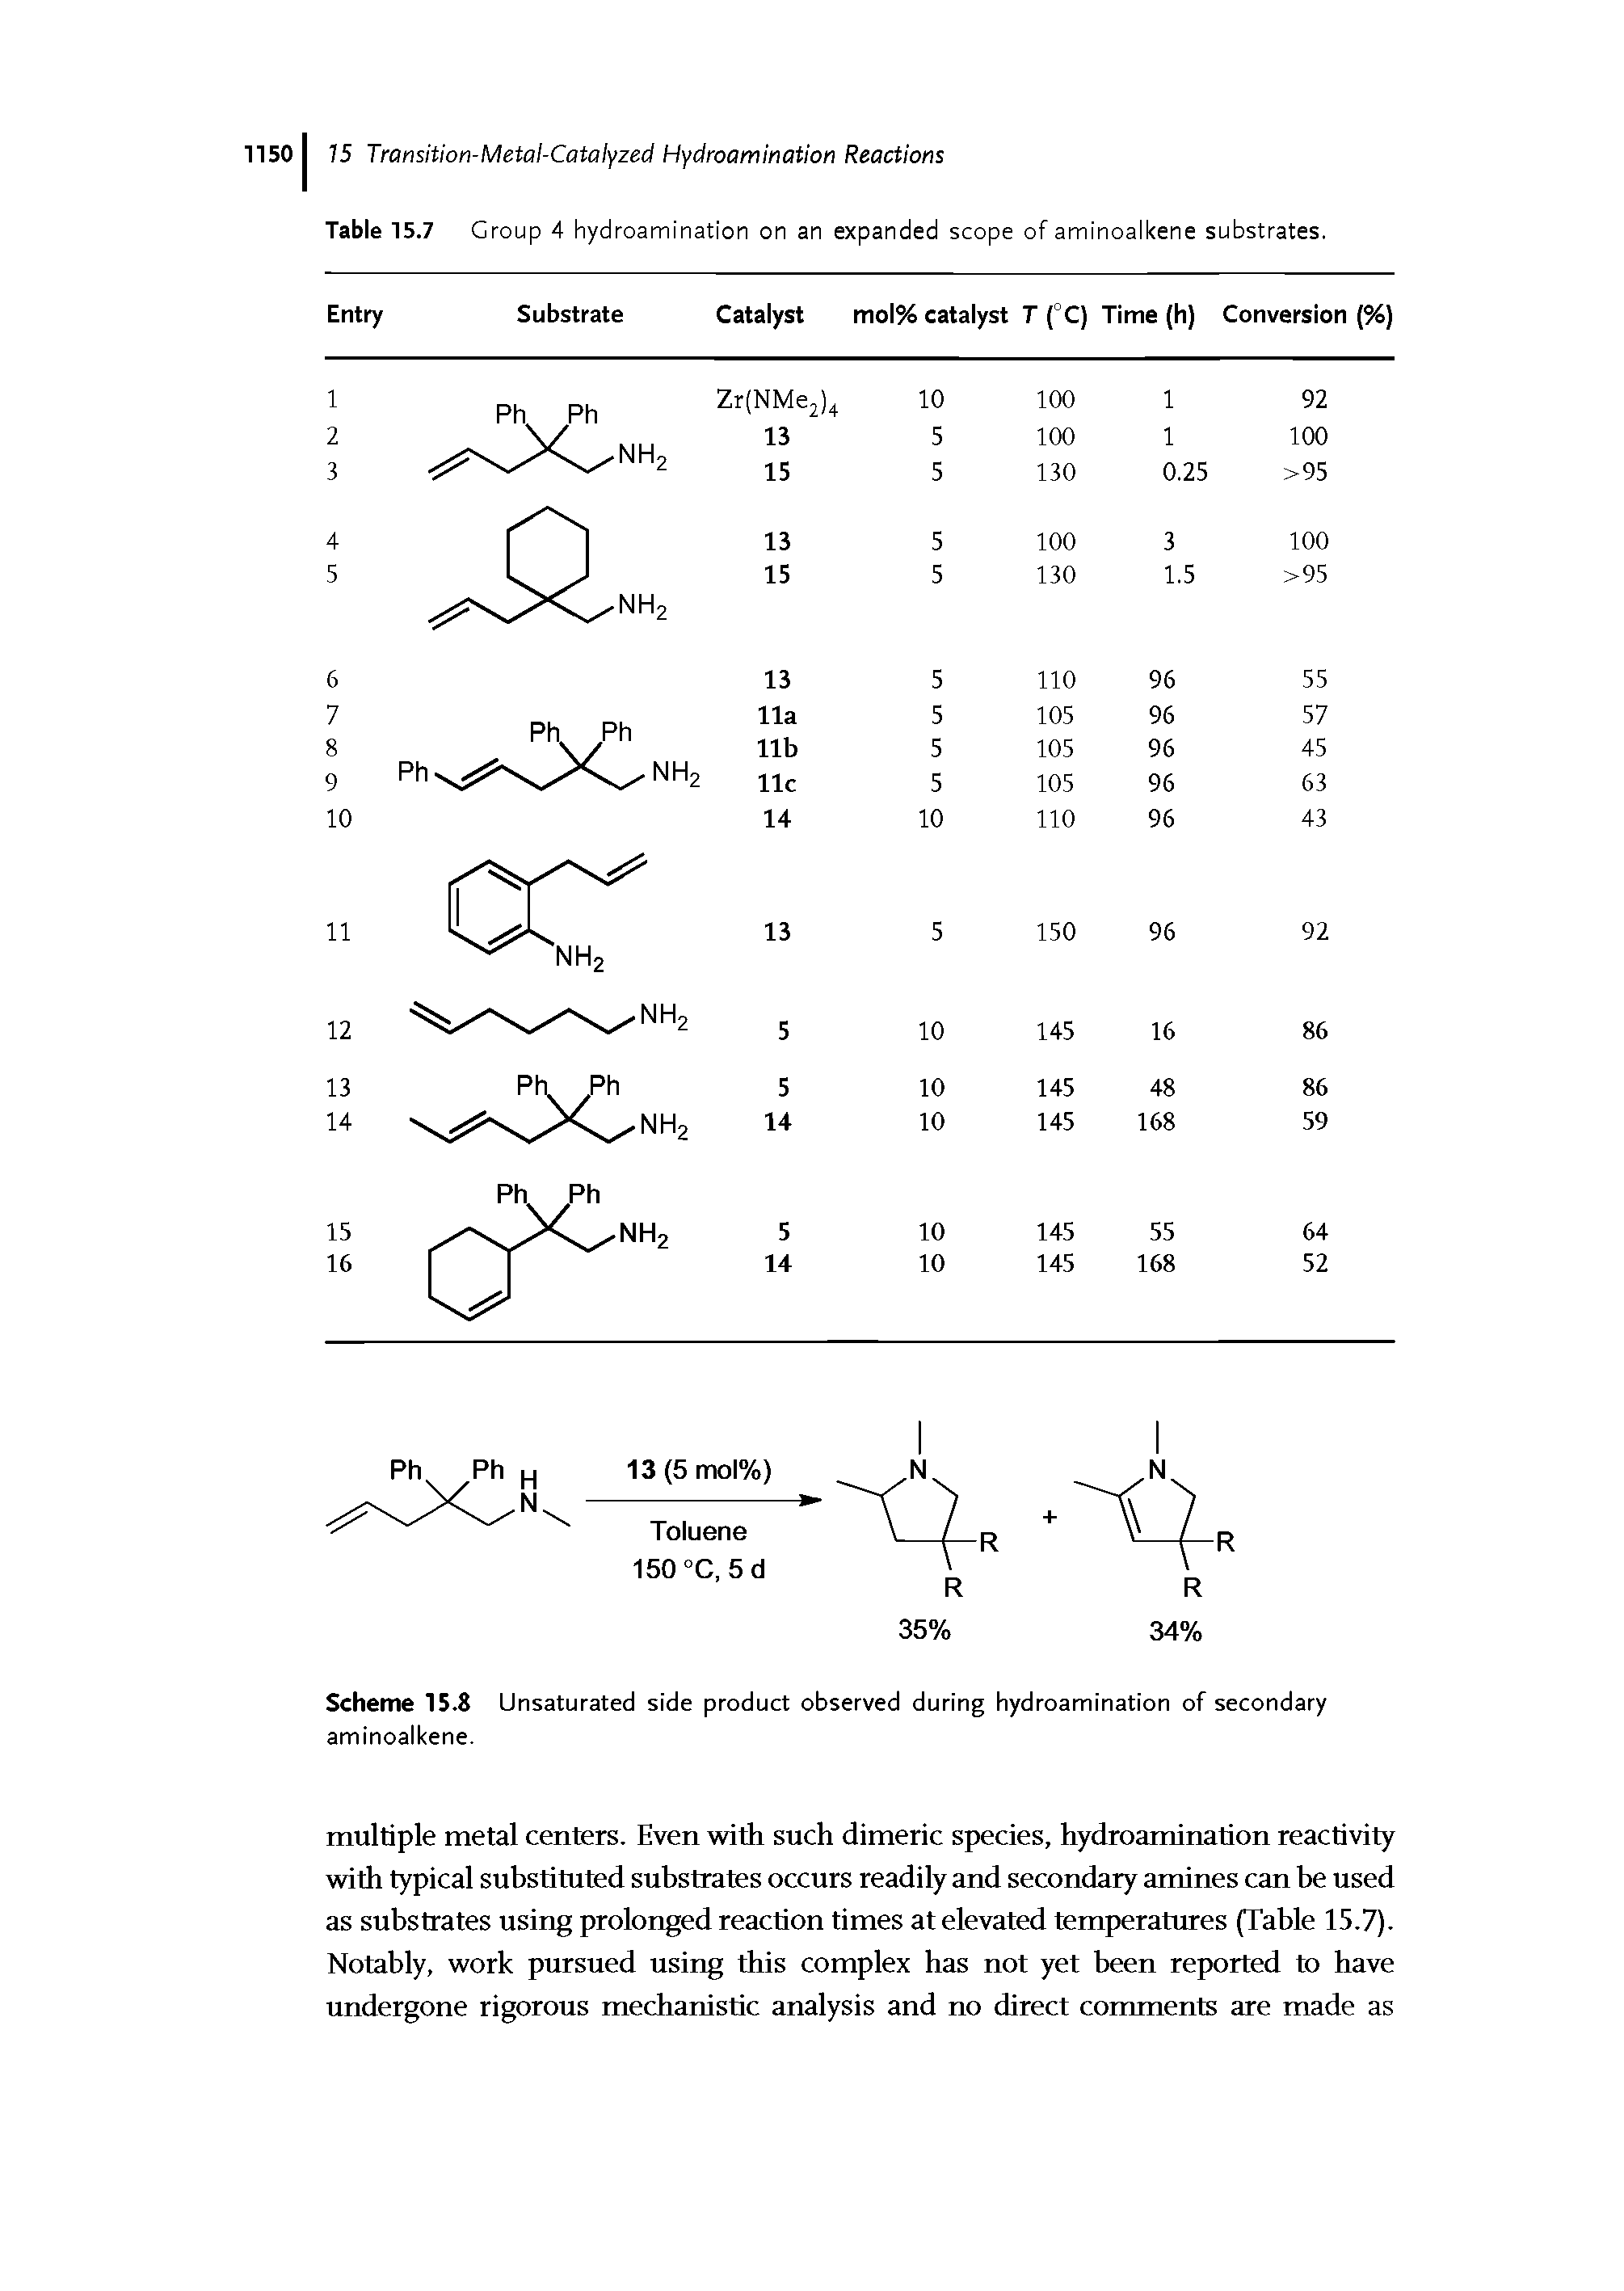 Table 15.7 Group 4 hydroamination on an expanded scope of aminoalkene substrates.